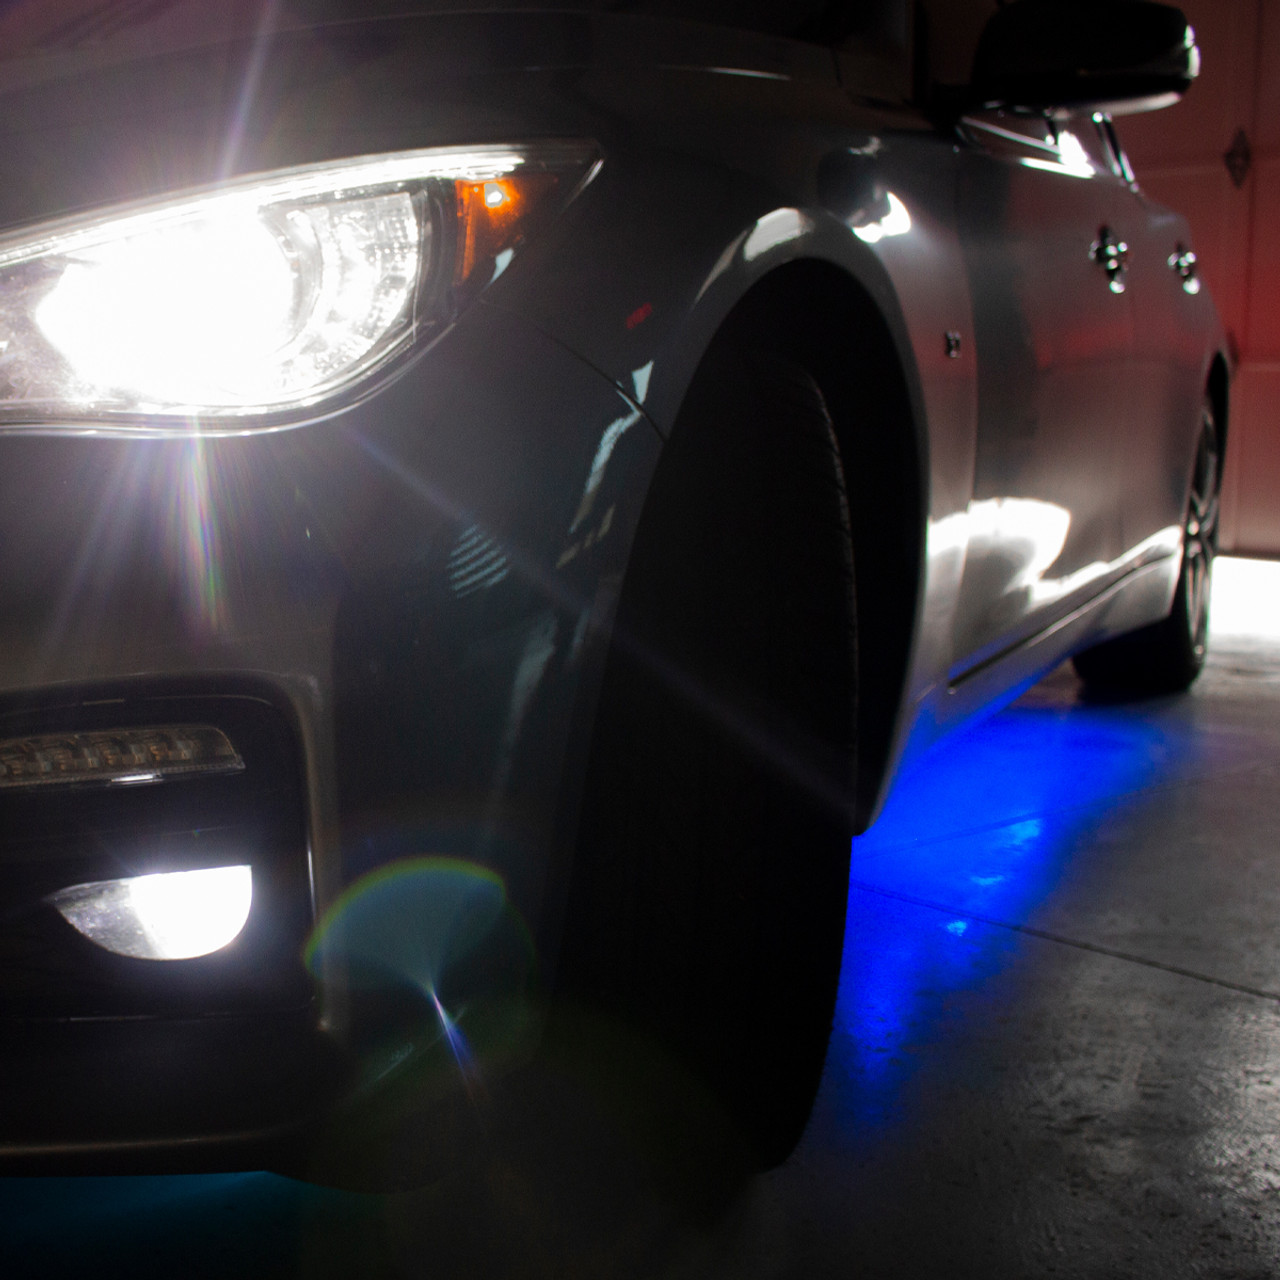 Adaptive RGB LED Aluminum Solid Underbody Kit with Key Card RGB Remote with Retail Box ColorADAPT Race Sport Lighting